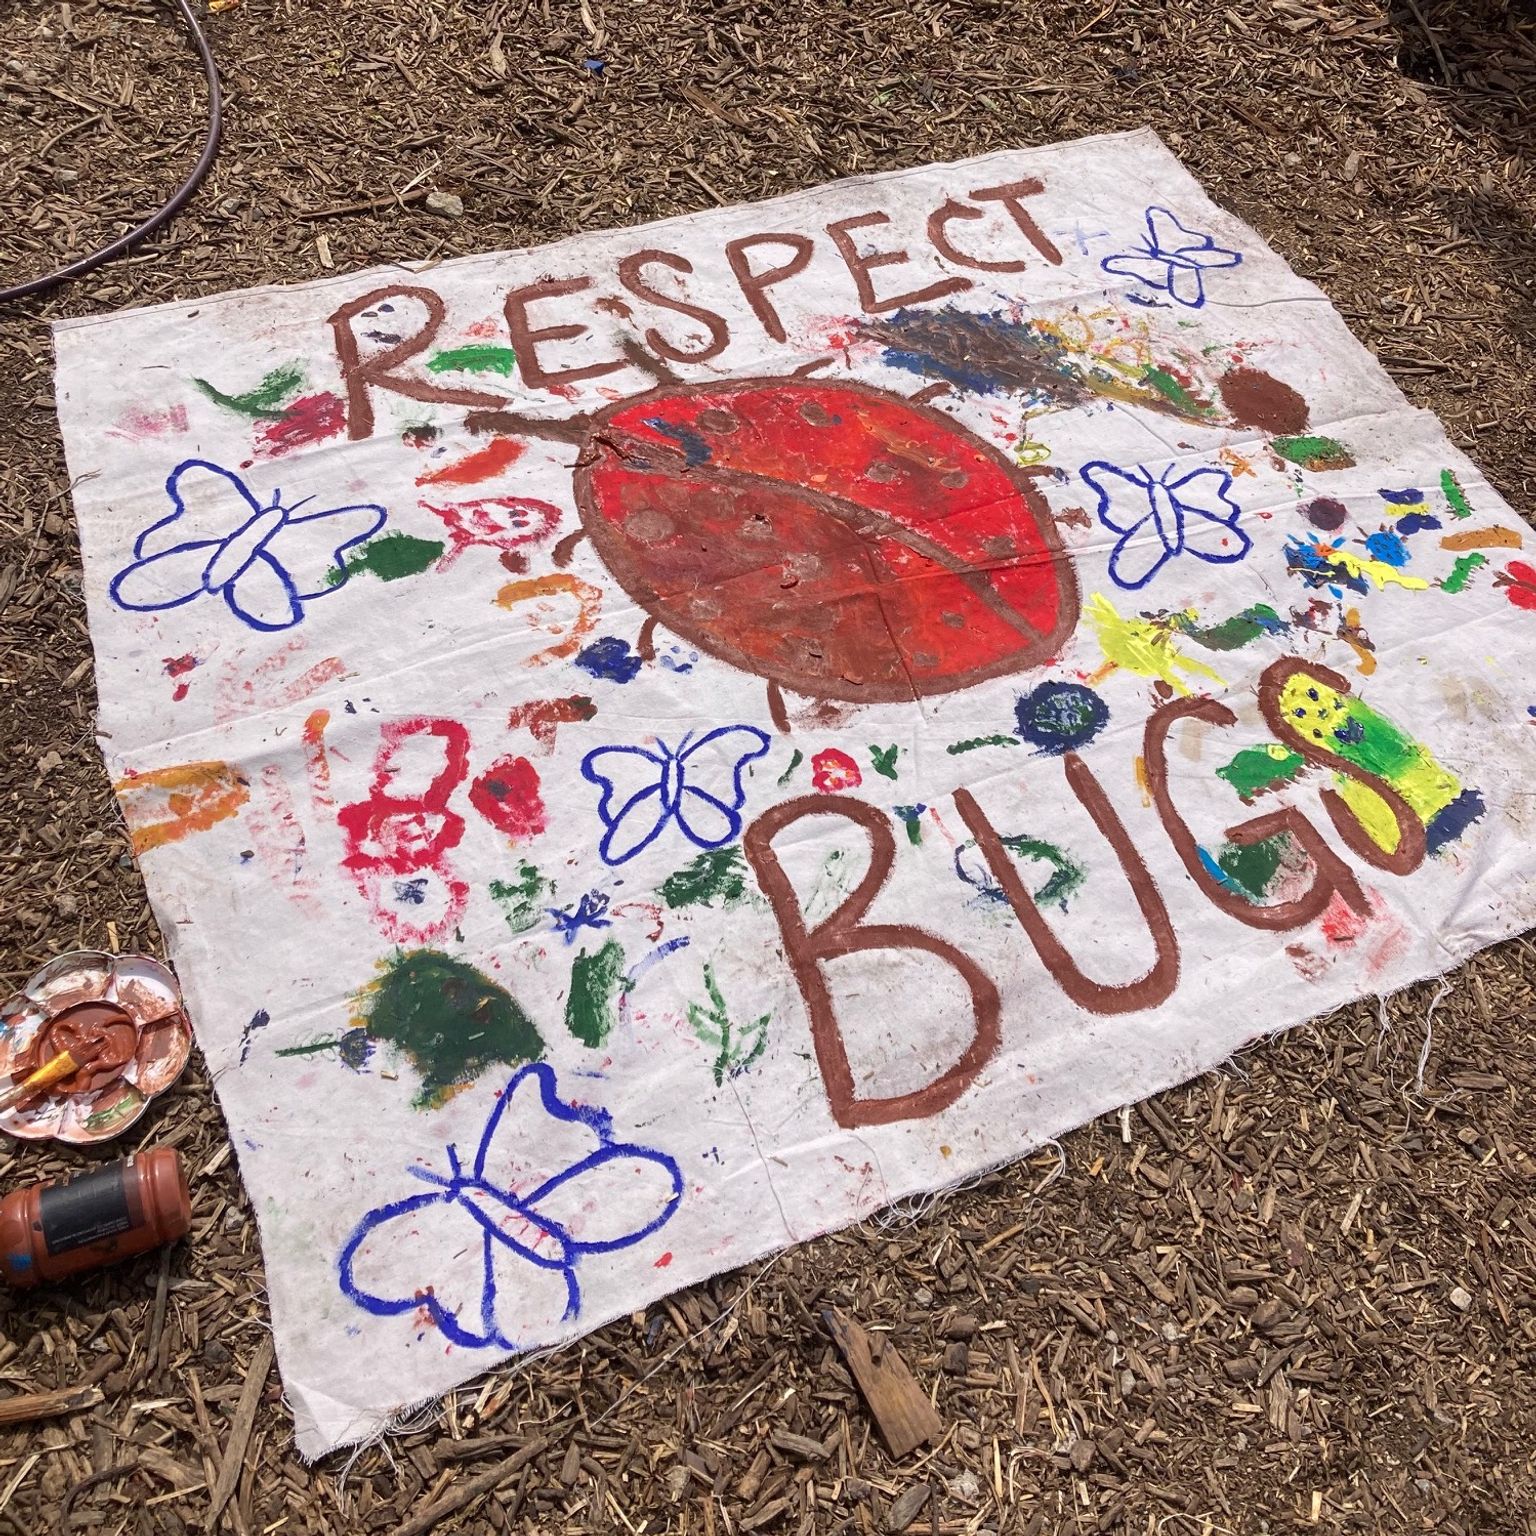 A collaboratively-painted banner that says "Respect Bugs" with a big ladybug in the middle